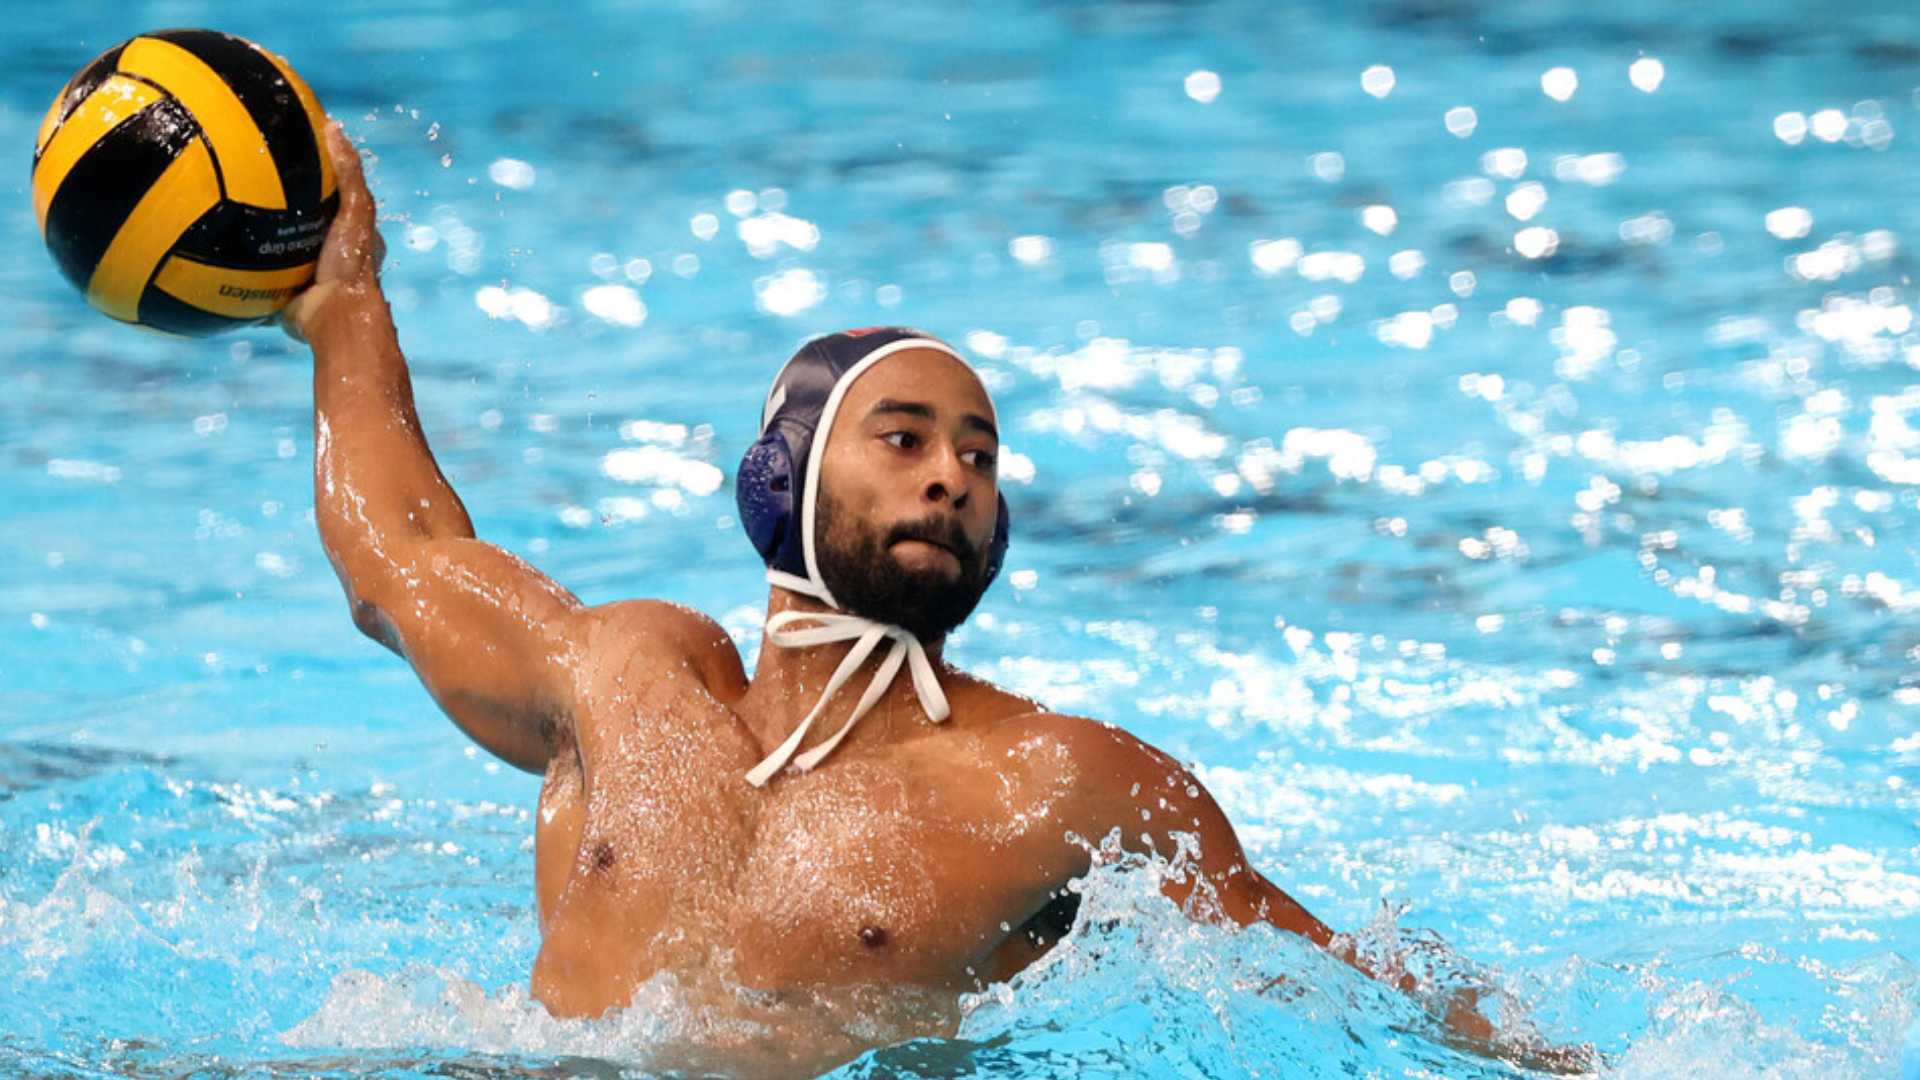 United States and Brazil clash for the gold in male's water polo